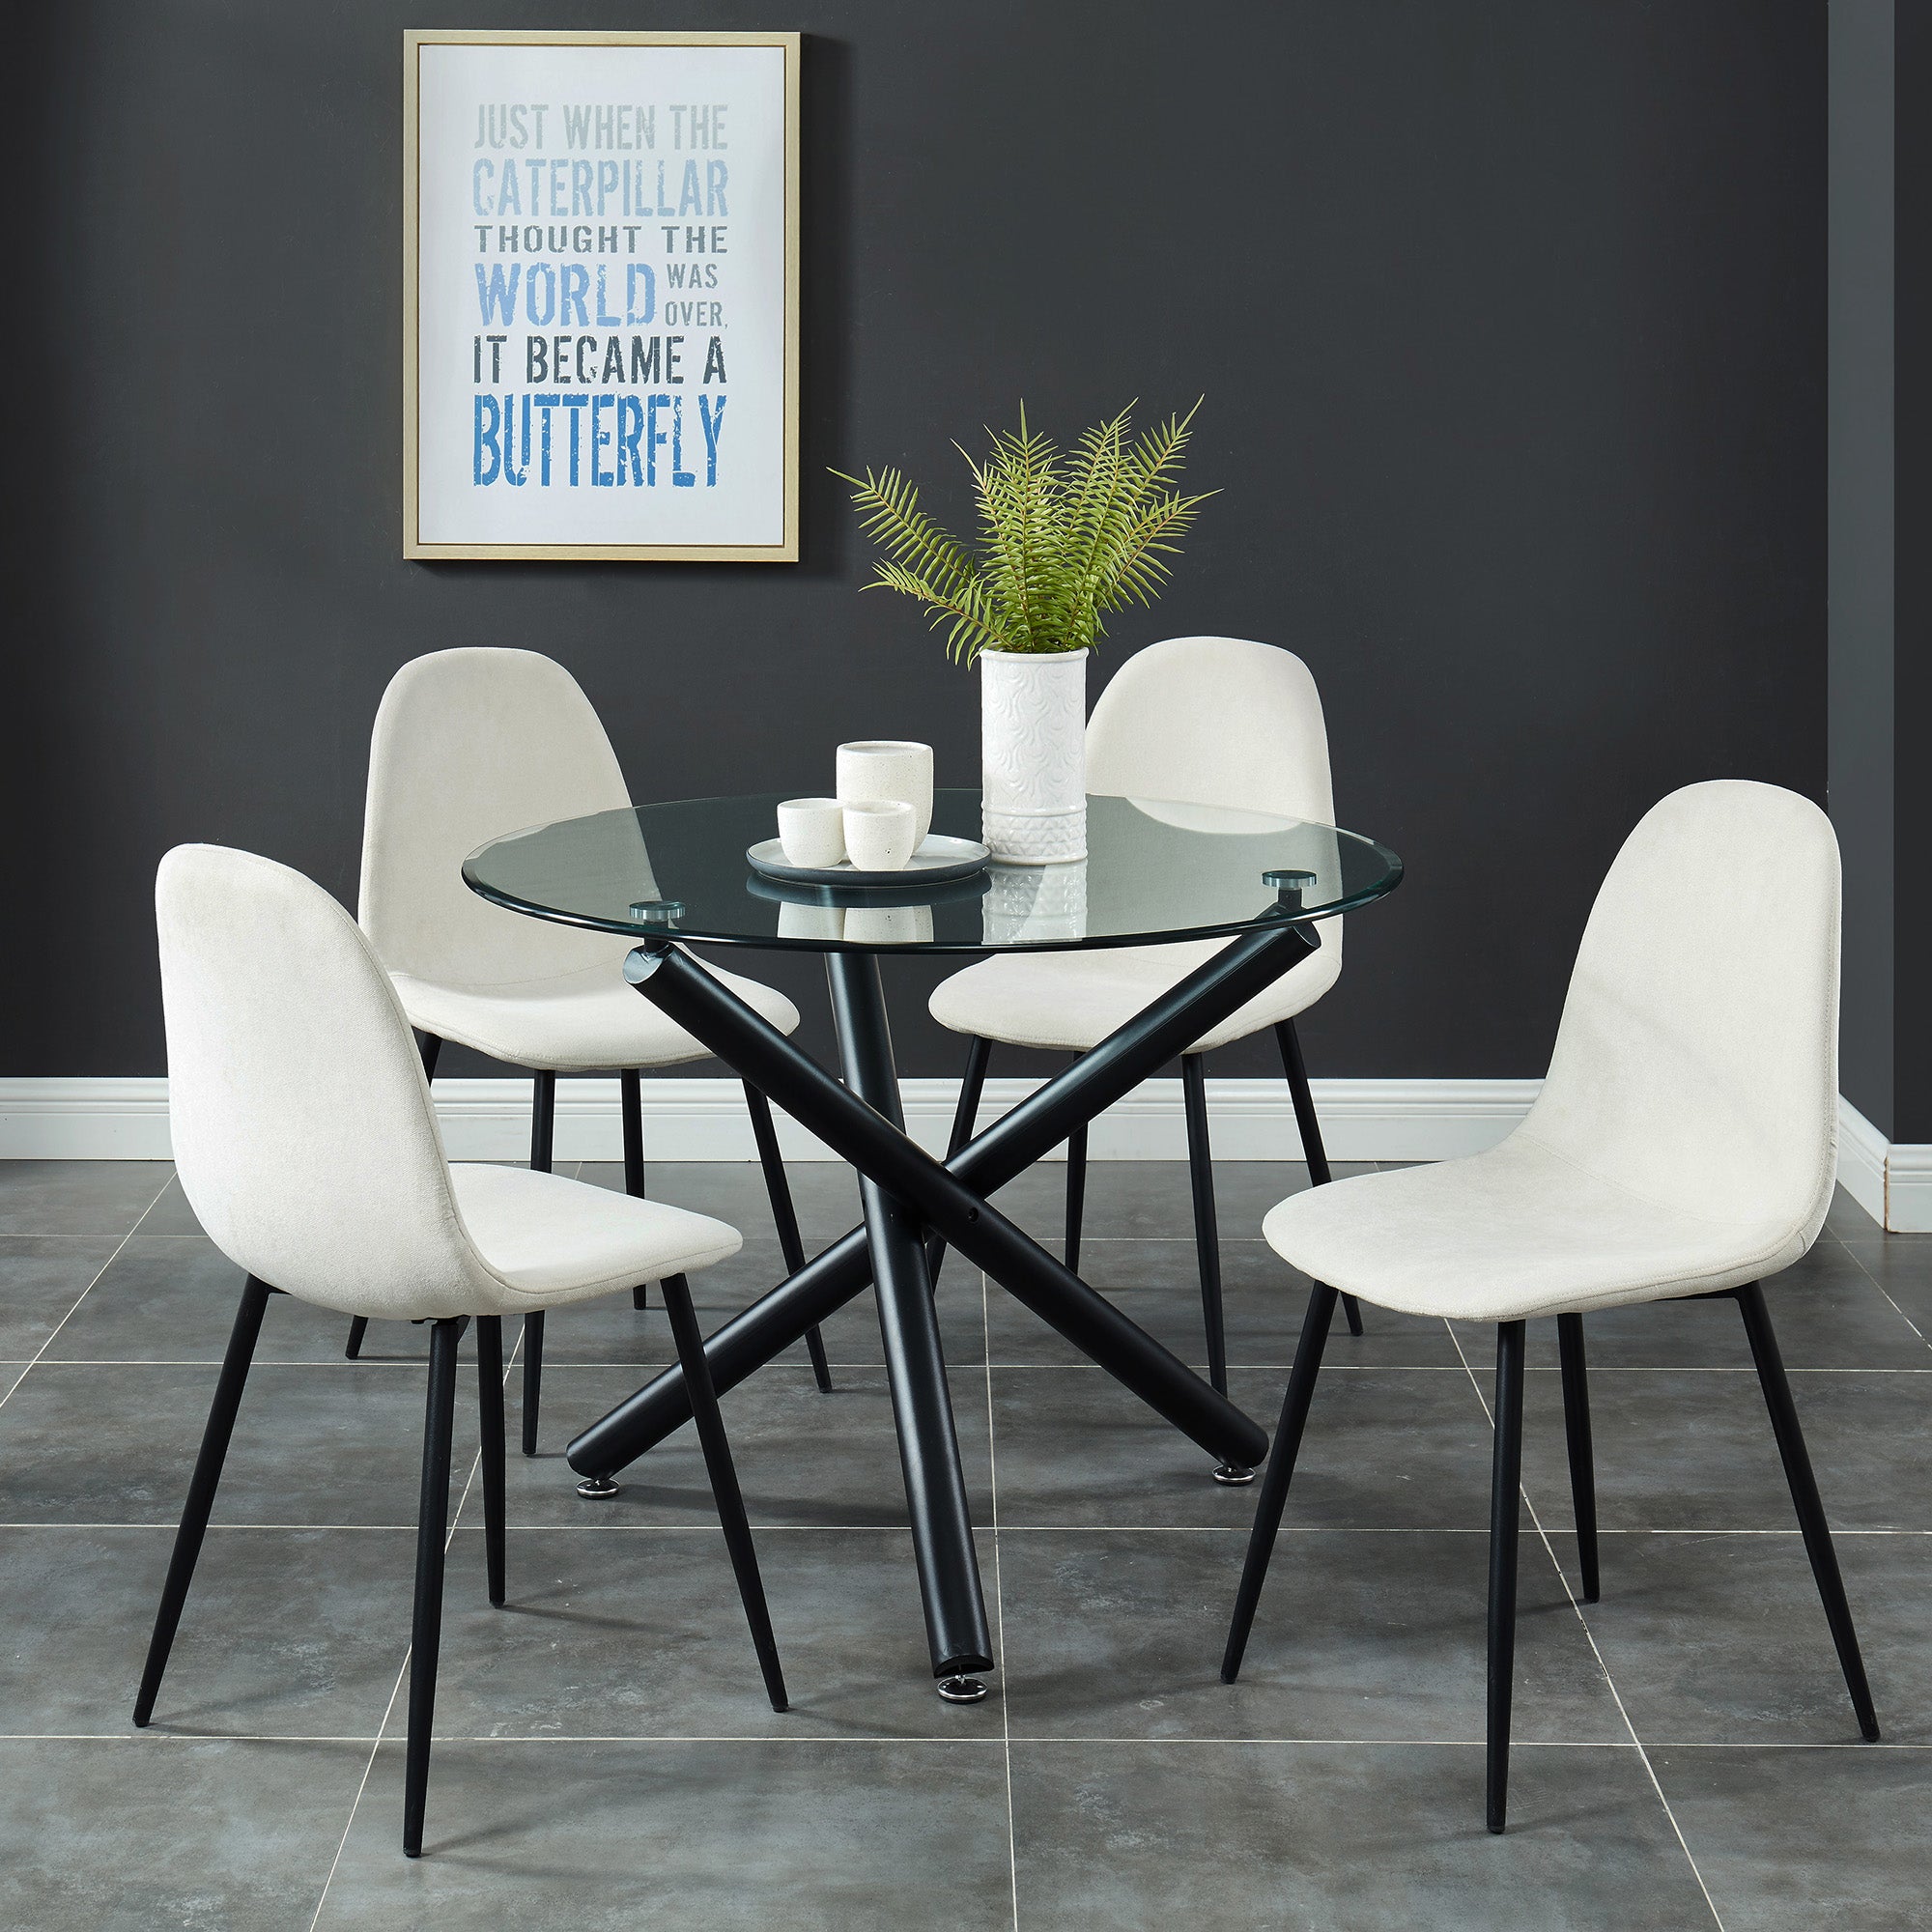 Suzette/Olly 5pc Dining Set in Black with Beige Chair 207-476/606BG